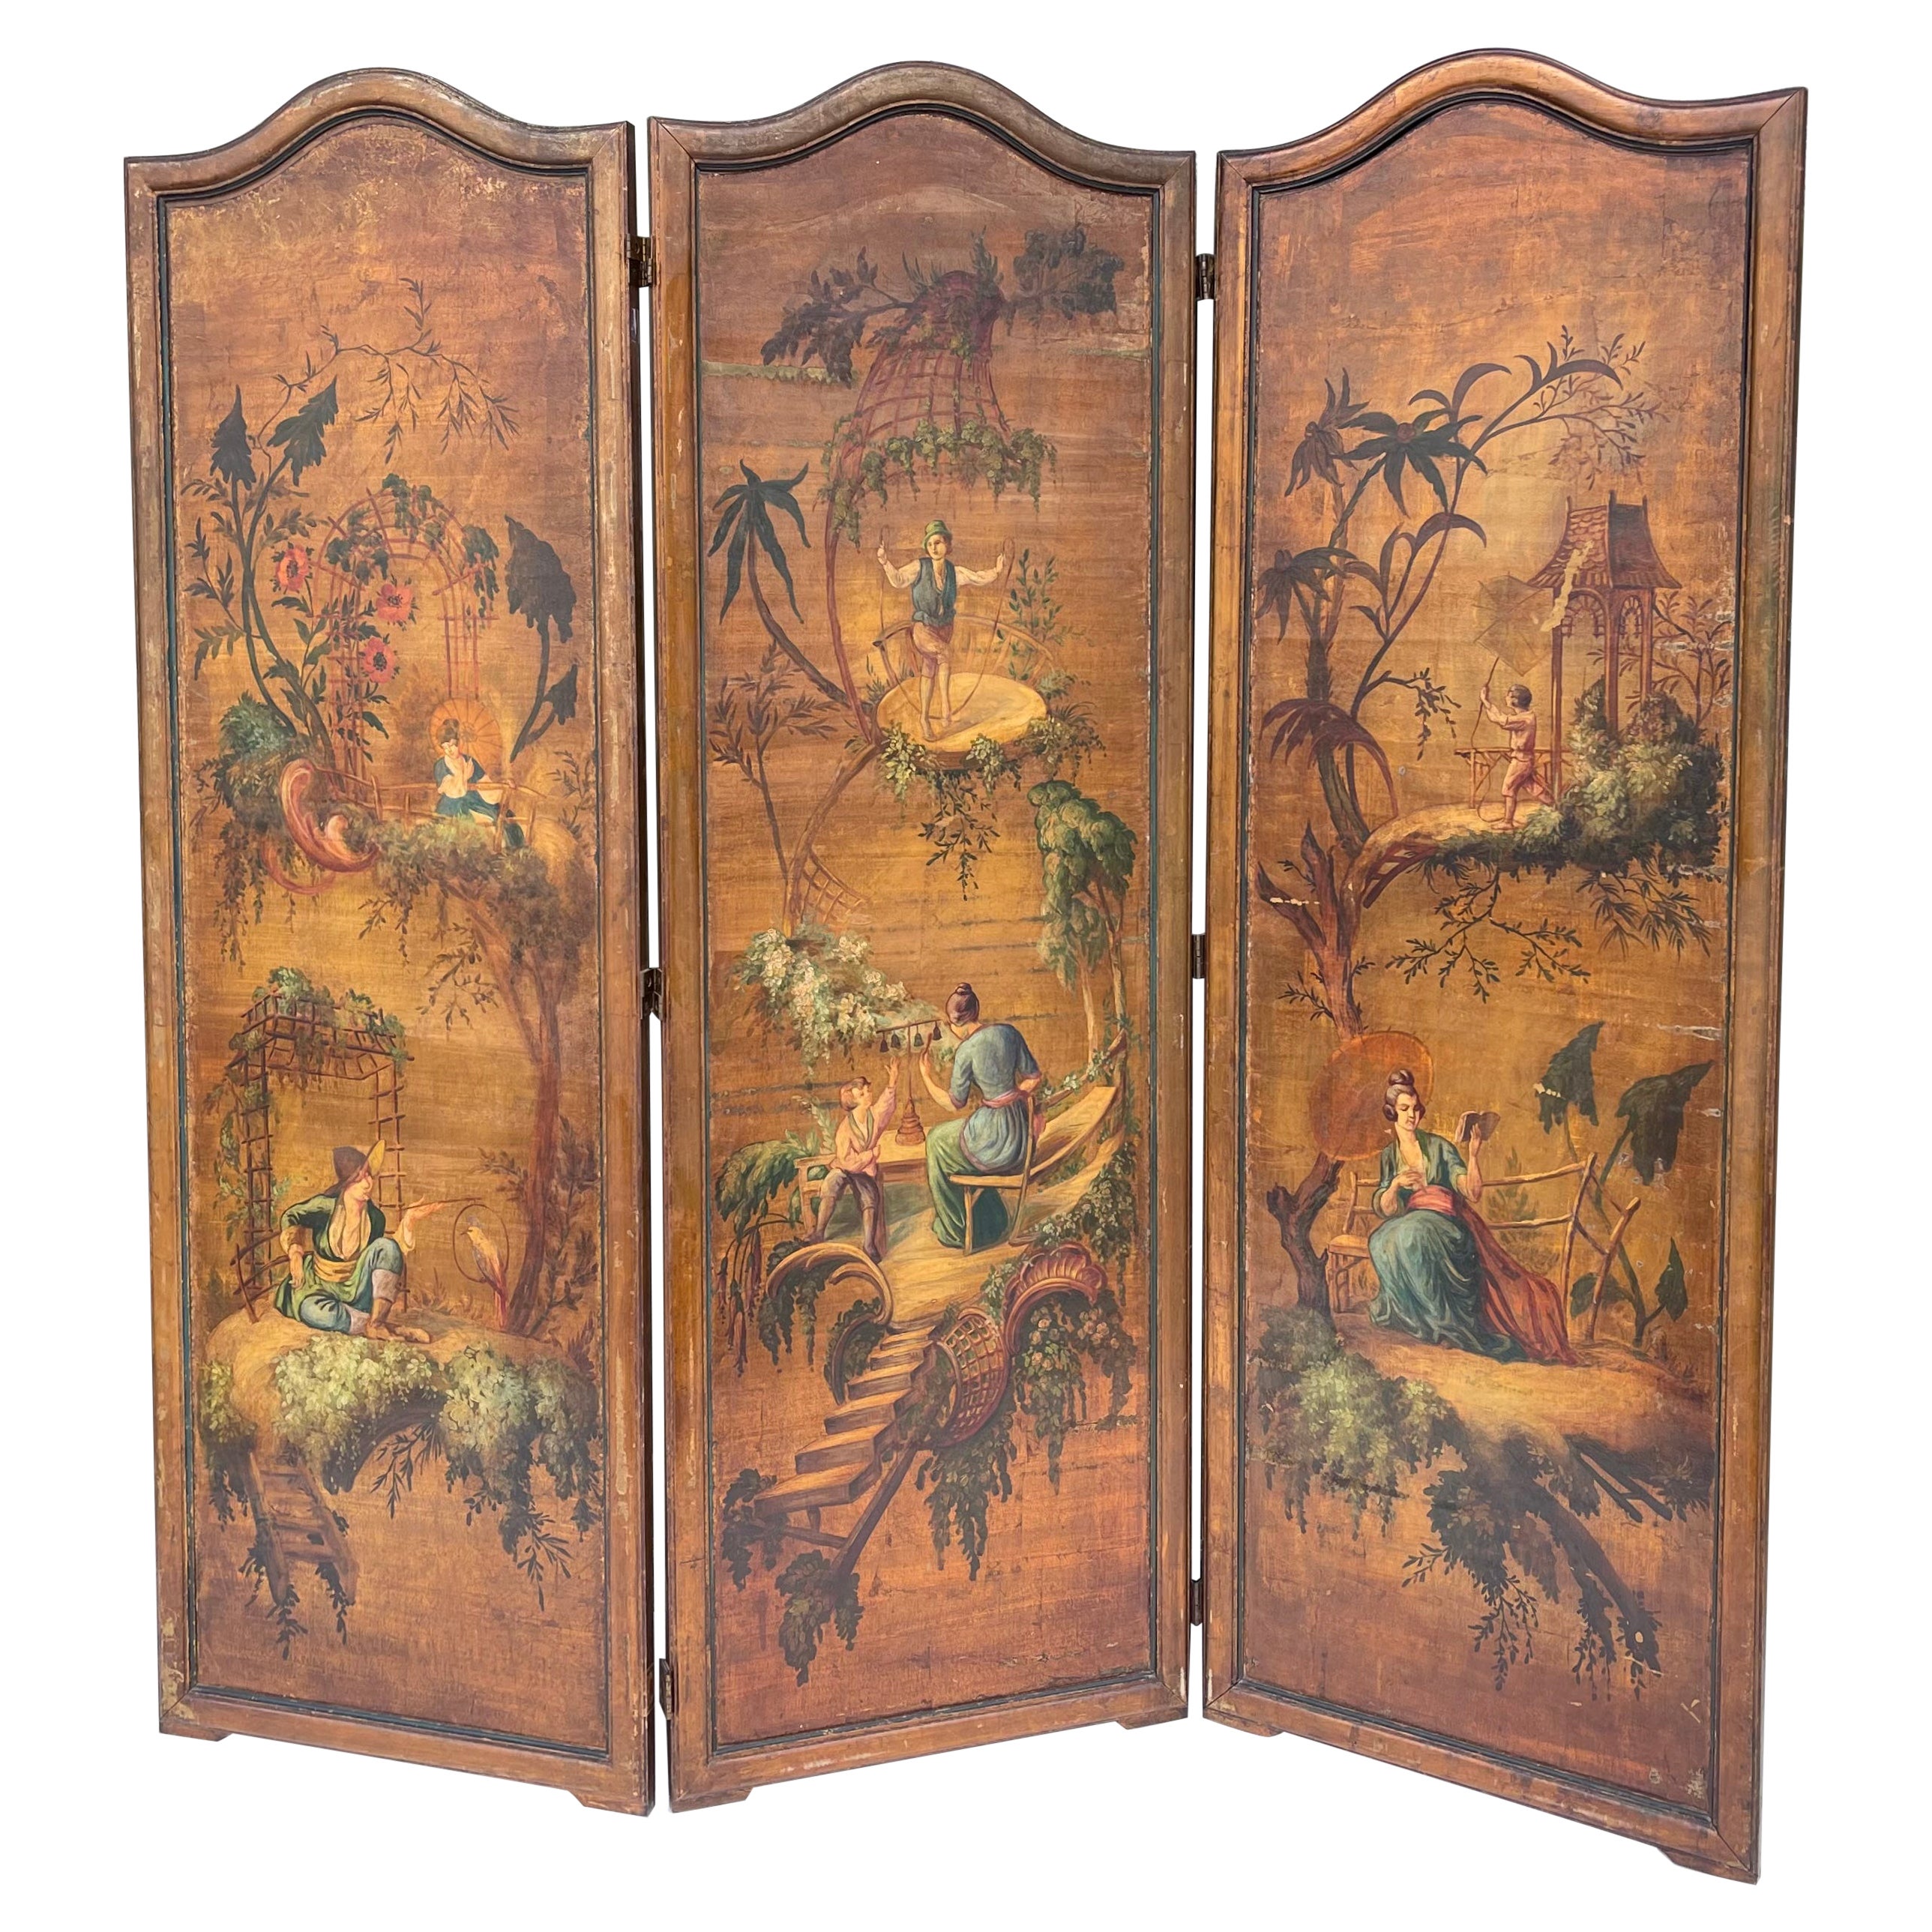 Early 20th-C. Hand Painted French Chinoiserie Oil On Canvas Screen - 3 Panels  For Sale